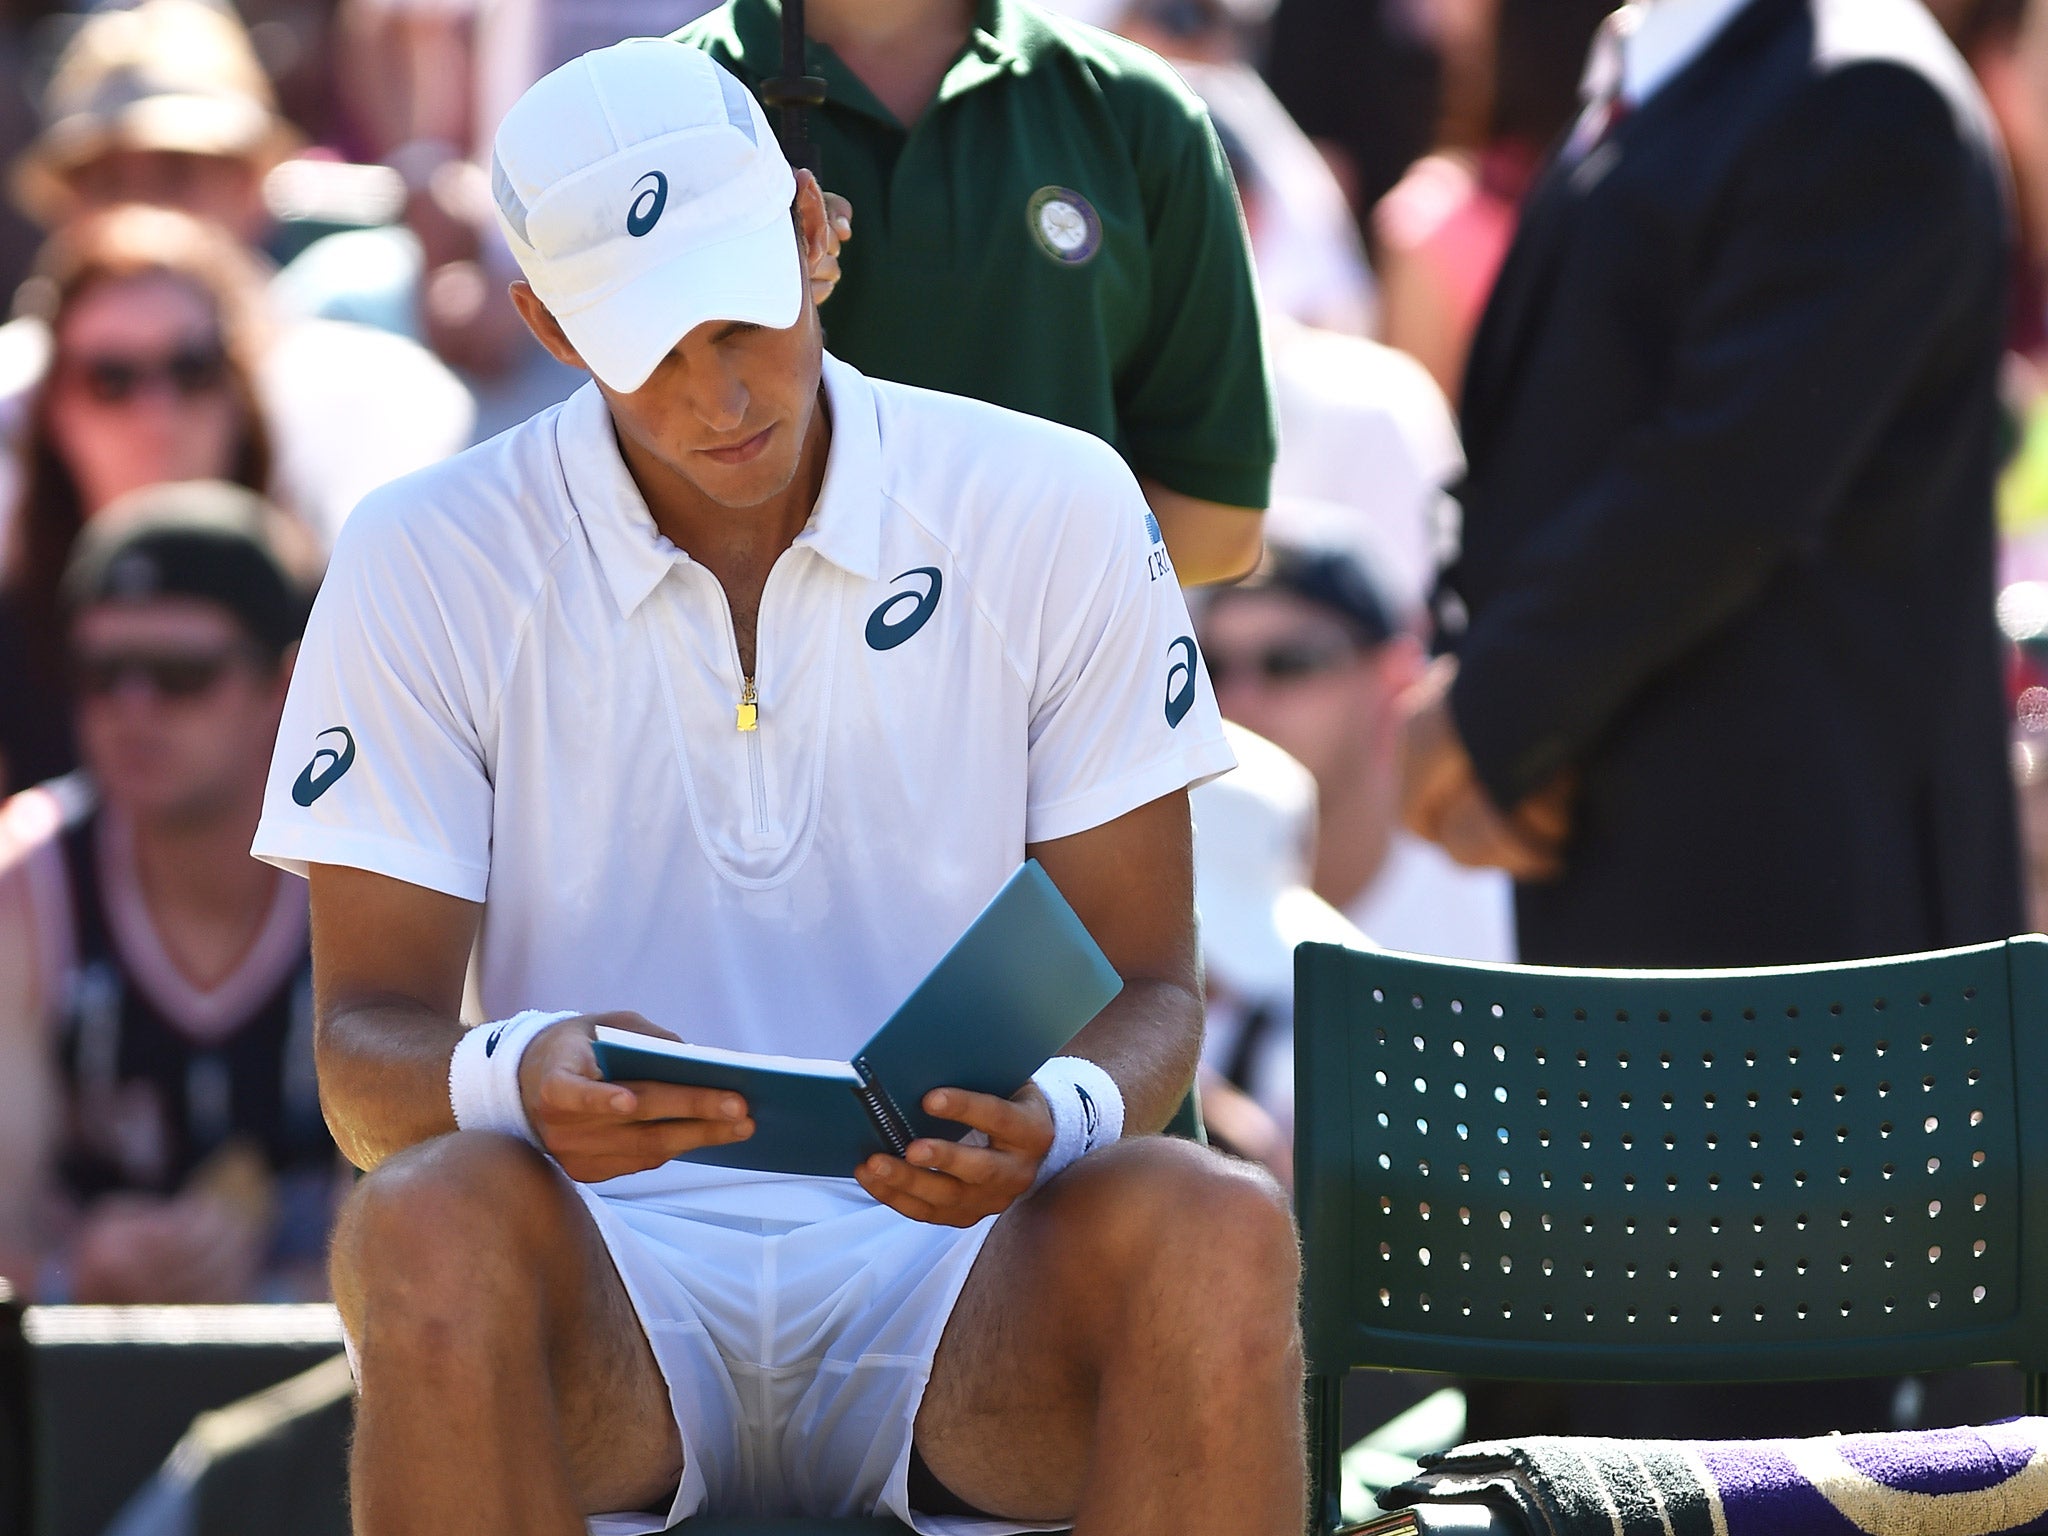 Vasek Pospisil consults his notebook earlier in the tournament